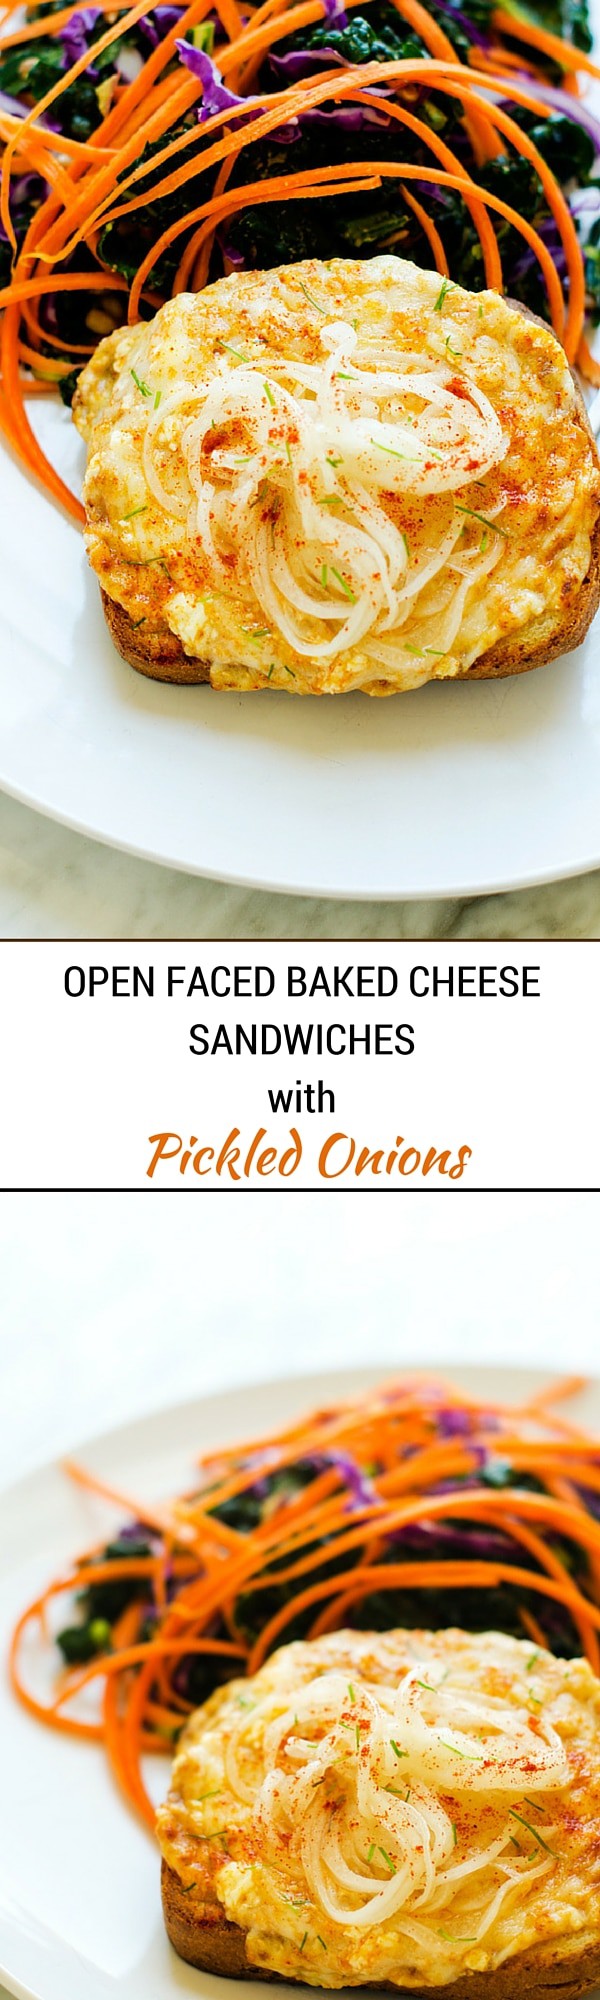 Baked-Cheese-Sadwiches